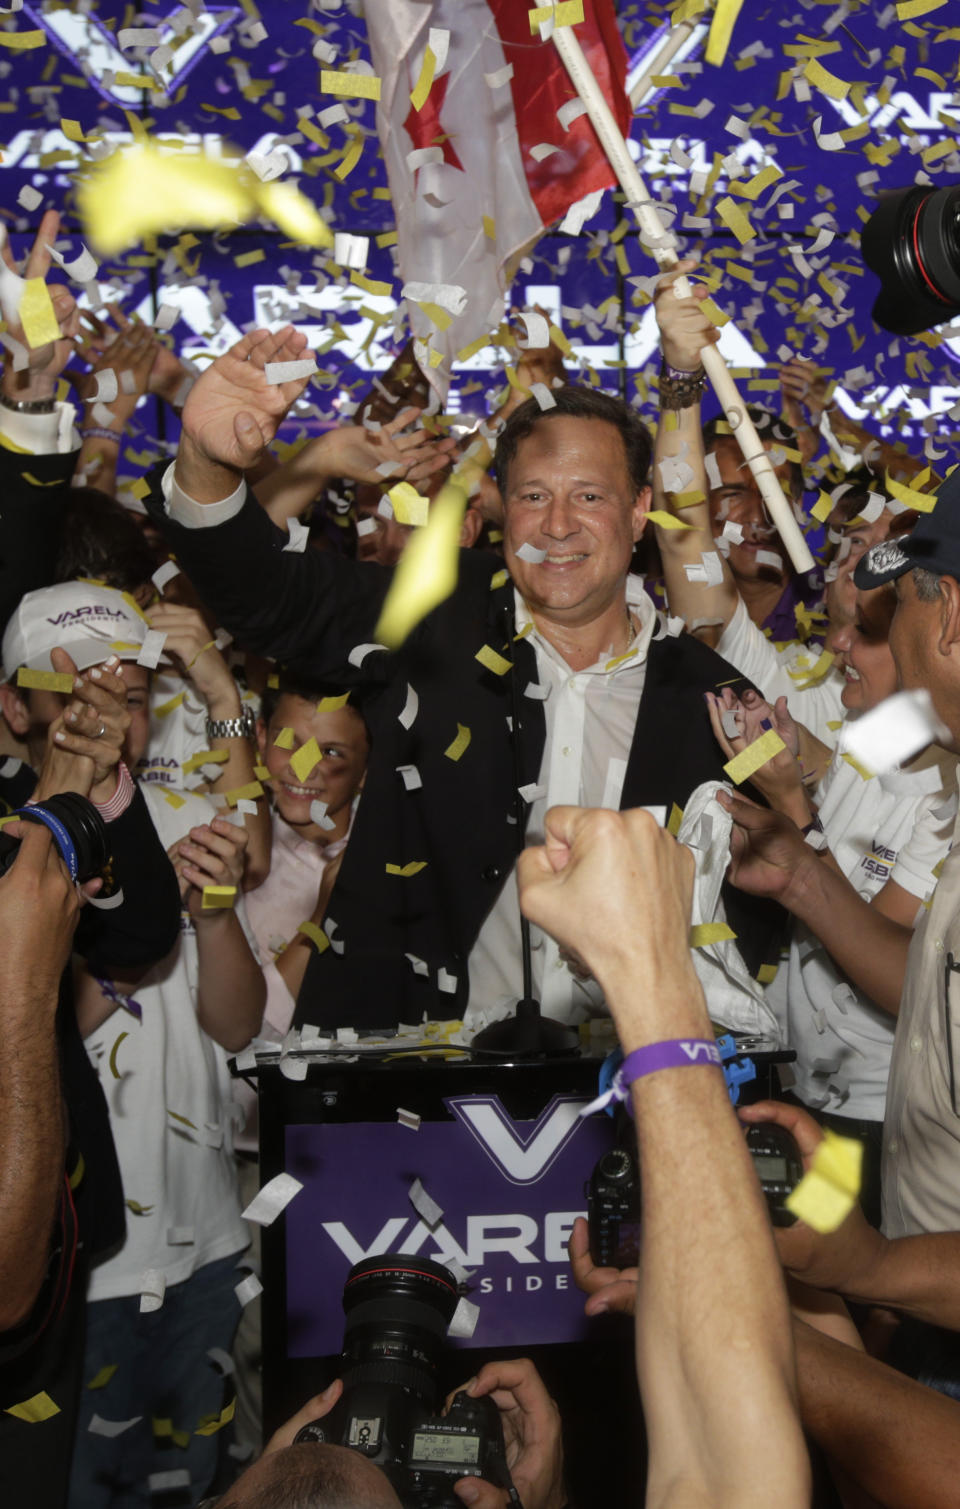 Juan Carlos Varela, Panama's president elect, waves to supporters after delivering his acceptance speech in Panama City, Sunday, May 4, 2014. Varela was declared the victor of Panama's presidential election, thwarting an attempt by former ally President Ricardo Martinelli to extend his grip on power by electing a hand-picked successor. (AP Photo/Arnulfo Franco)